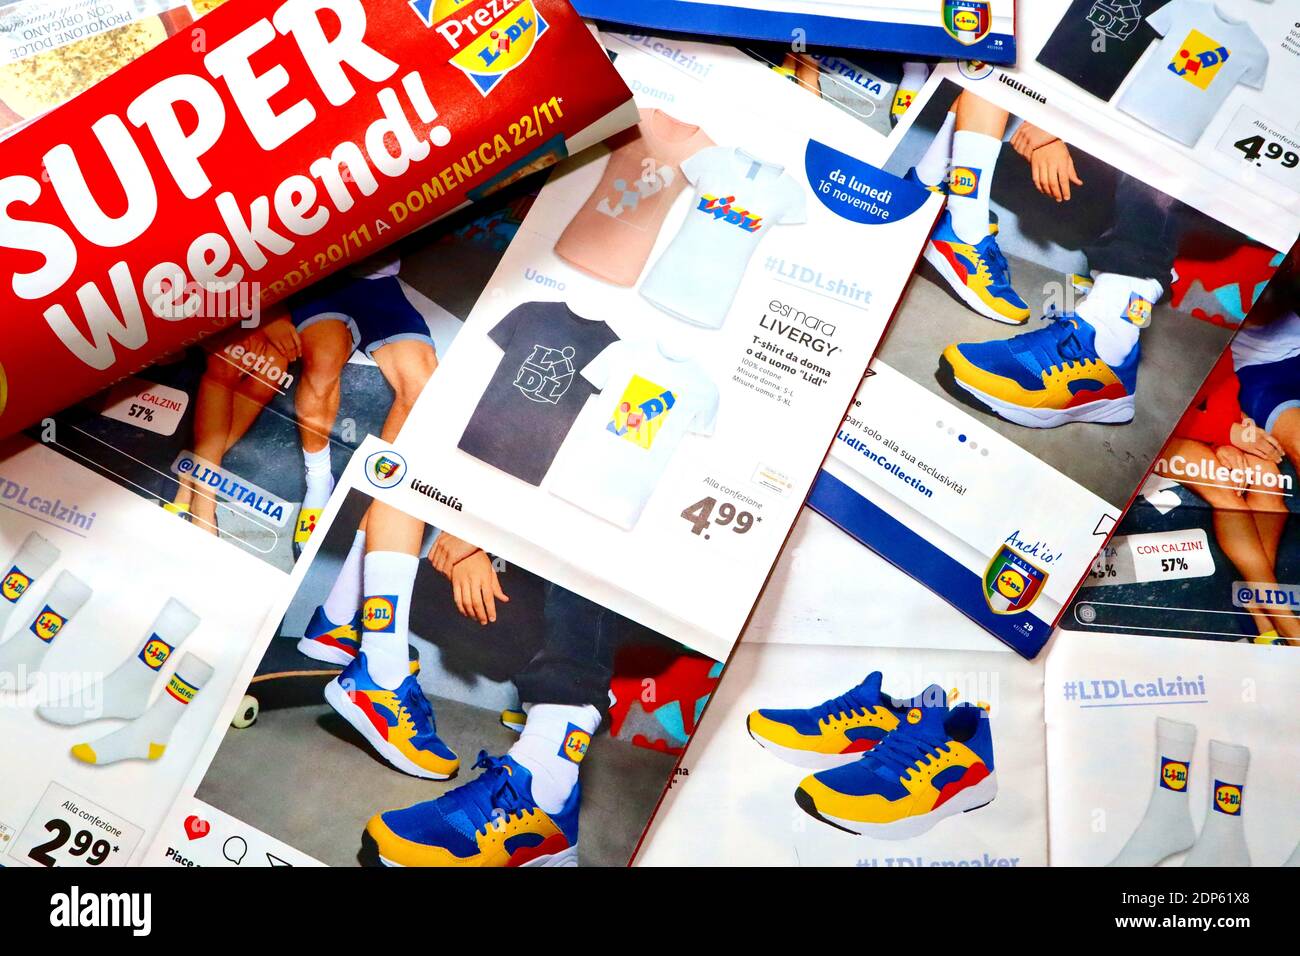 LIDL Supermarket chain Weekly Ad Flyer for Limited Edition of Sneakers,  Flip-Flops, Socks and T-Shirts Stock Photo - Alamy